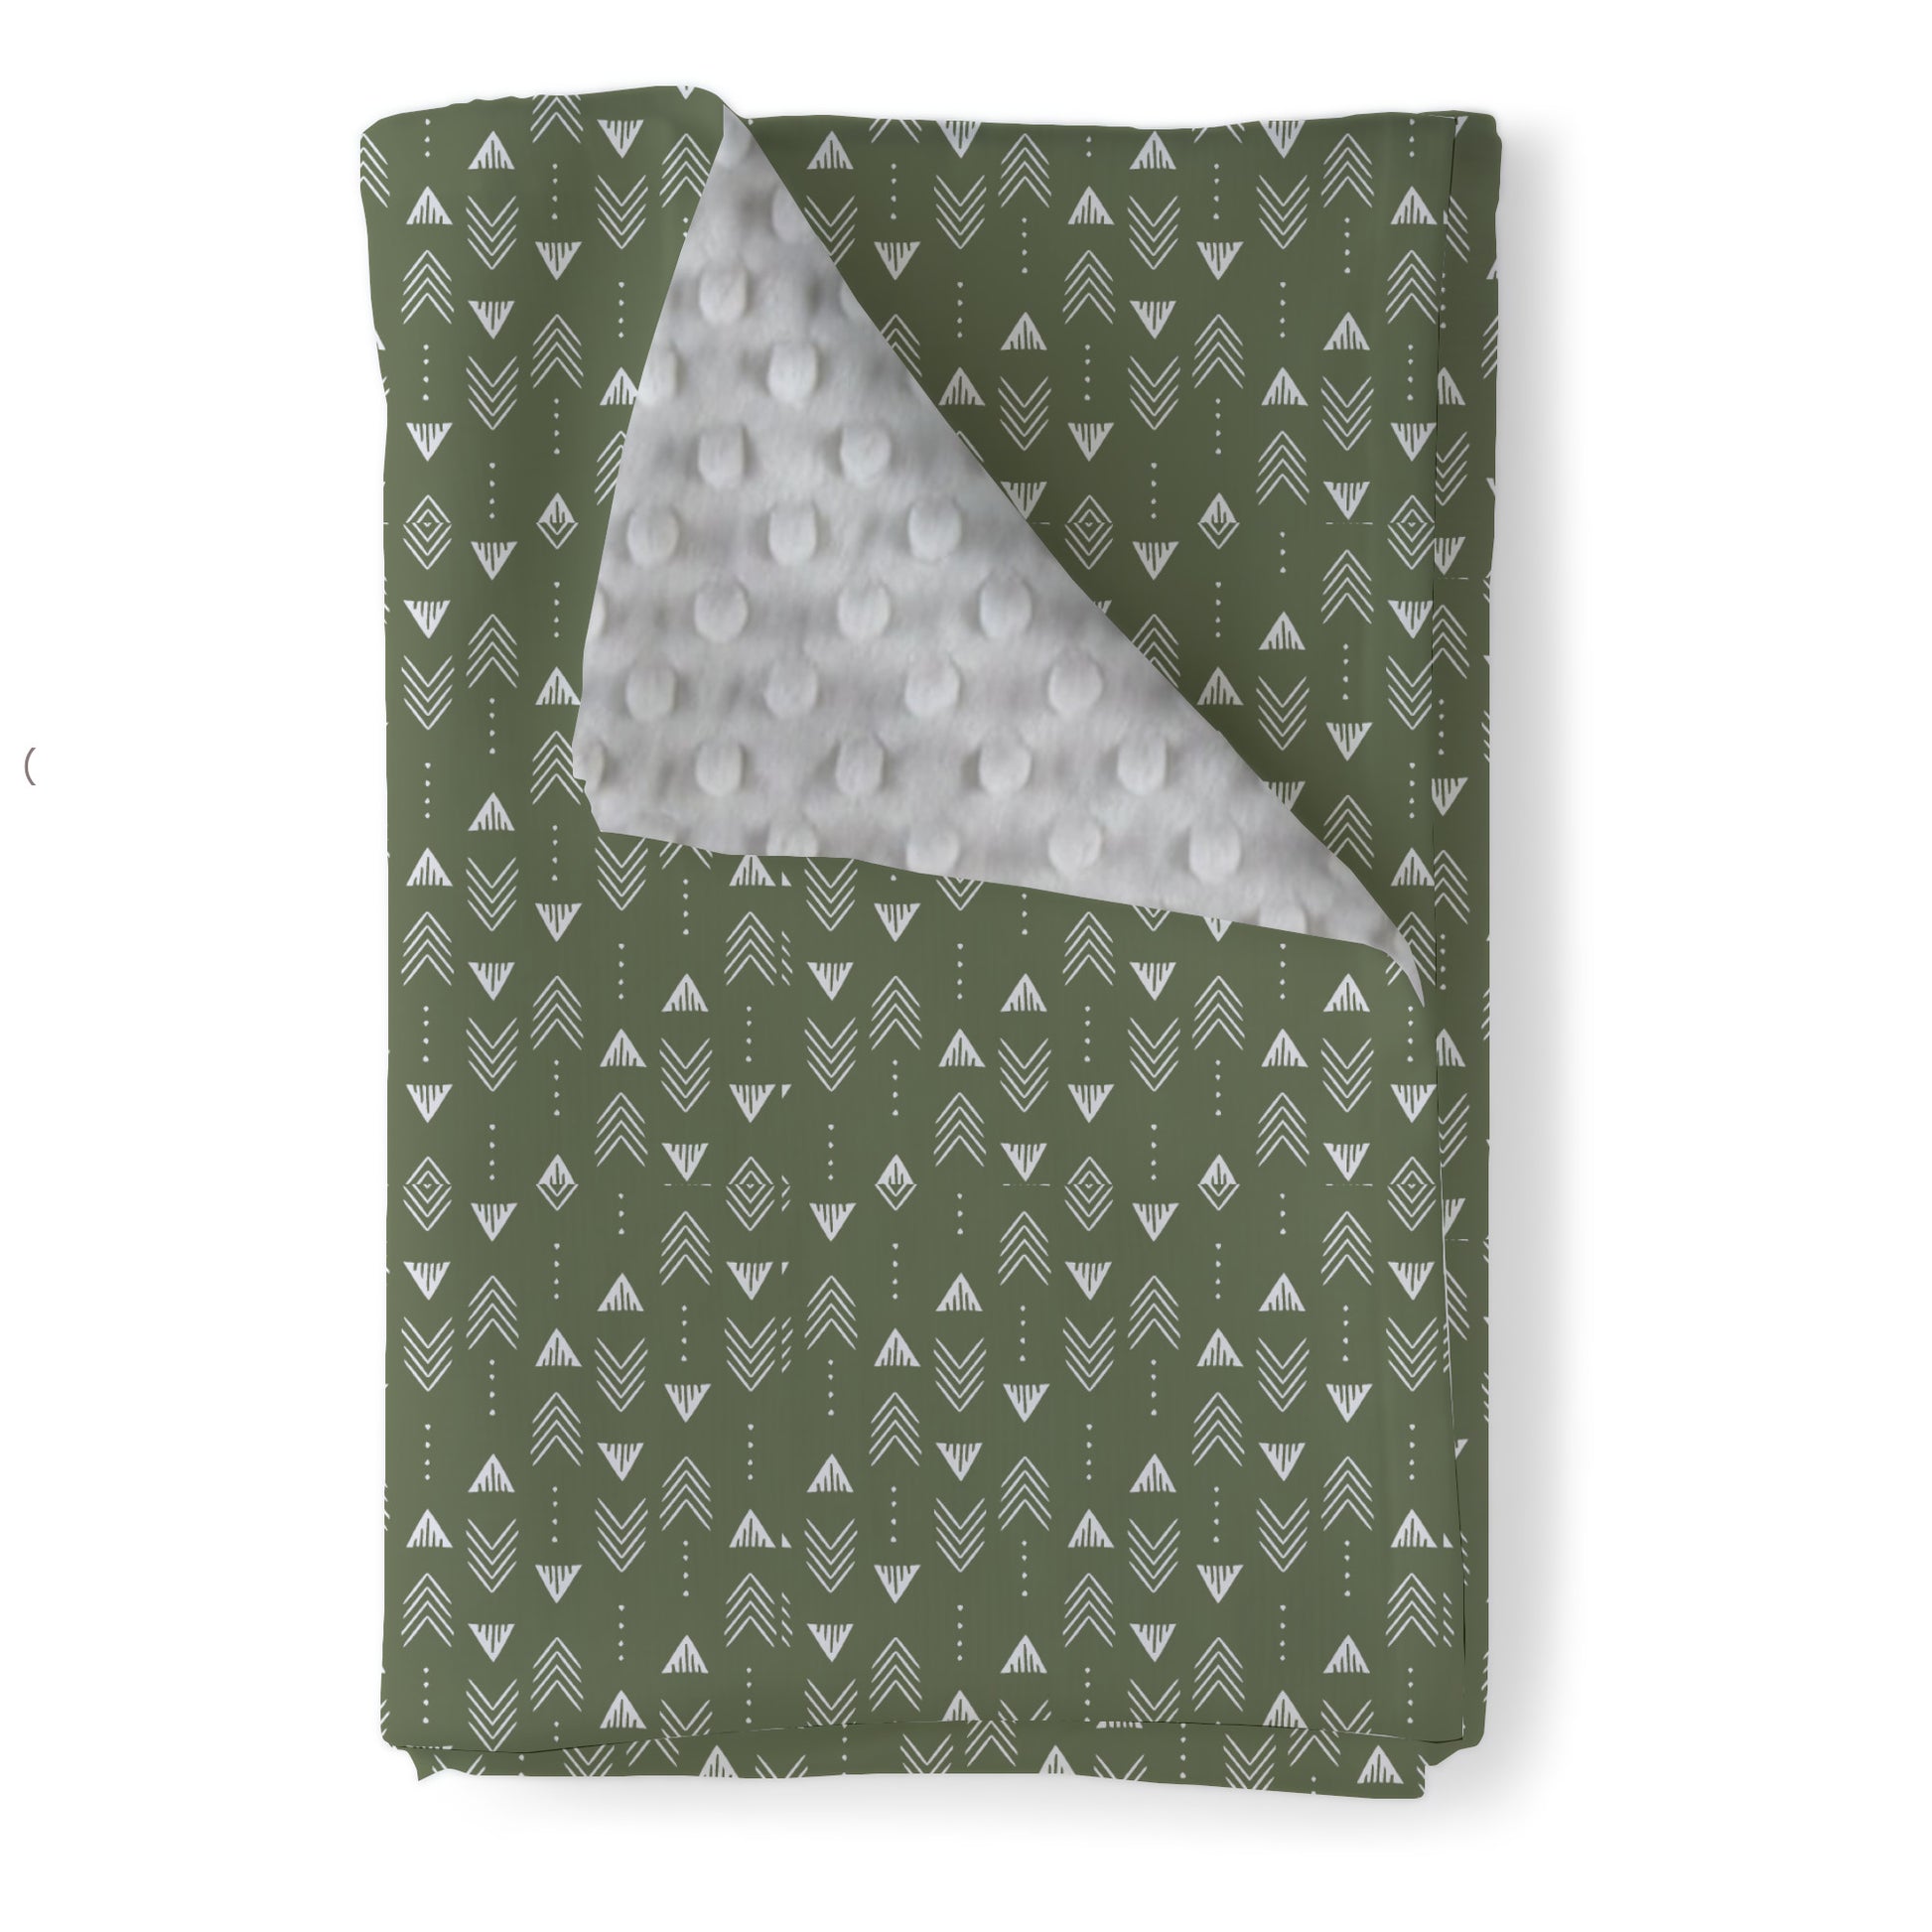 Olive Green Baby Blanket with Light Gray Minky Dimple on the back, Weathervanes, available in Lovey, travel, and toddler size. 